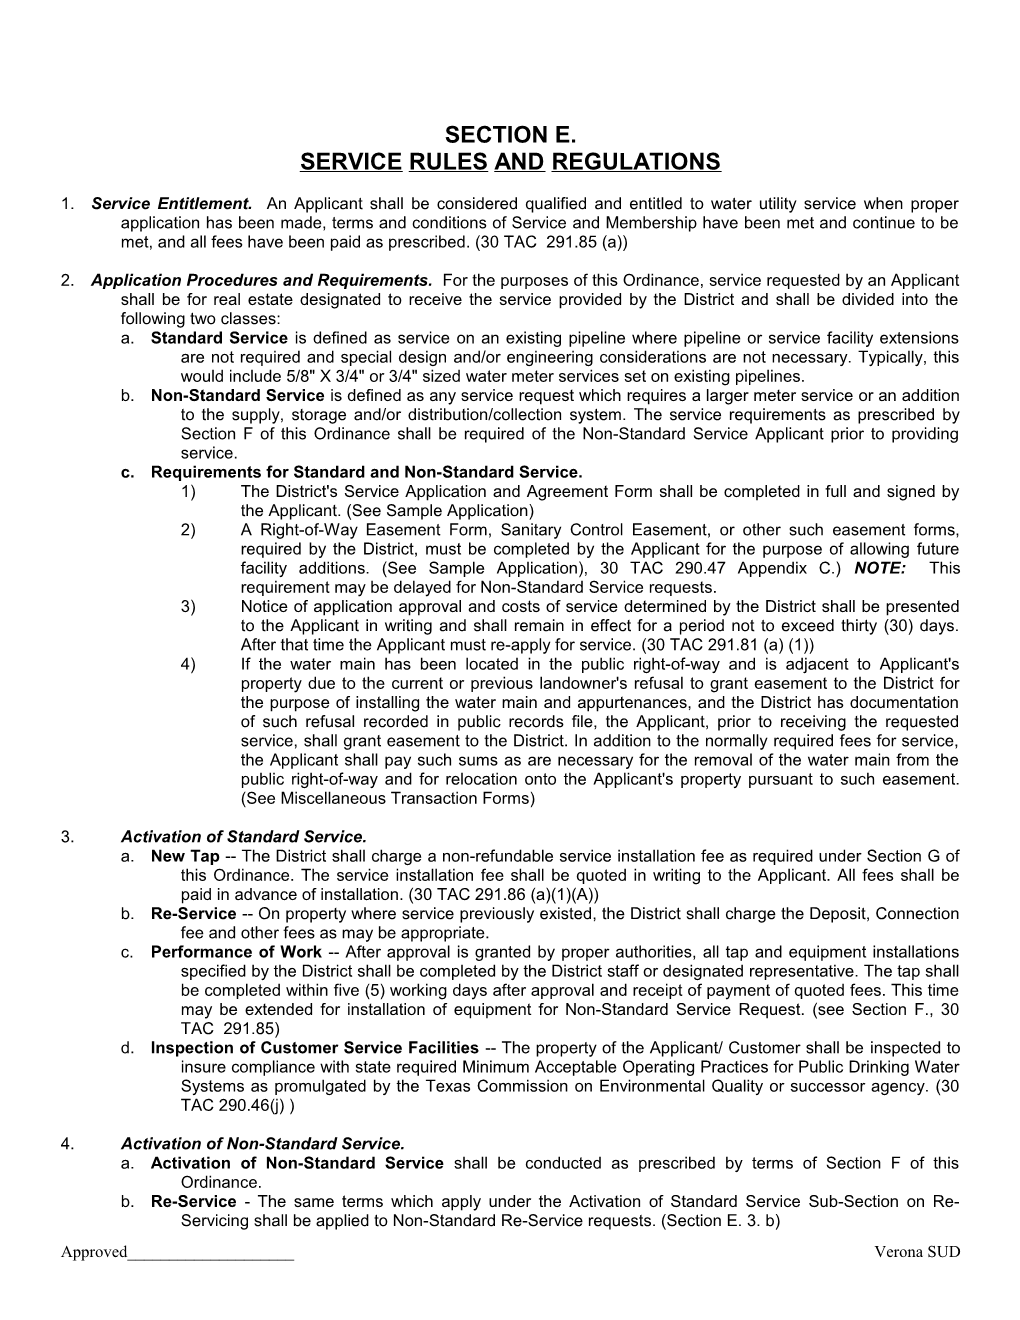 Service Rules and Regulations